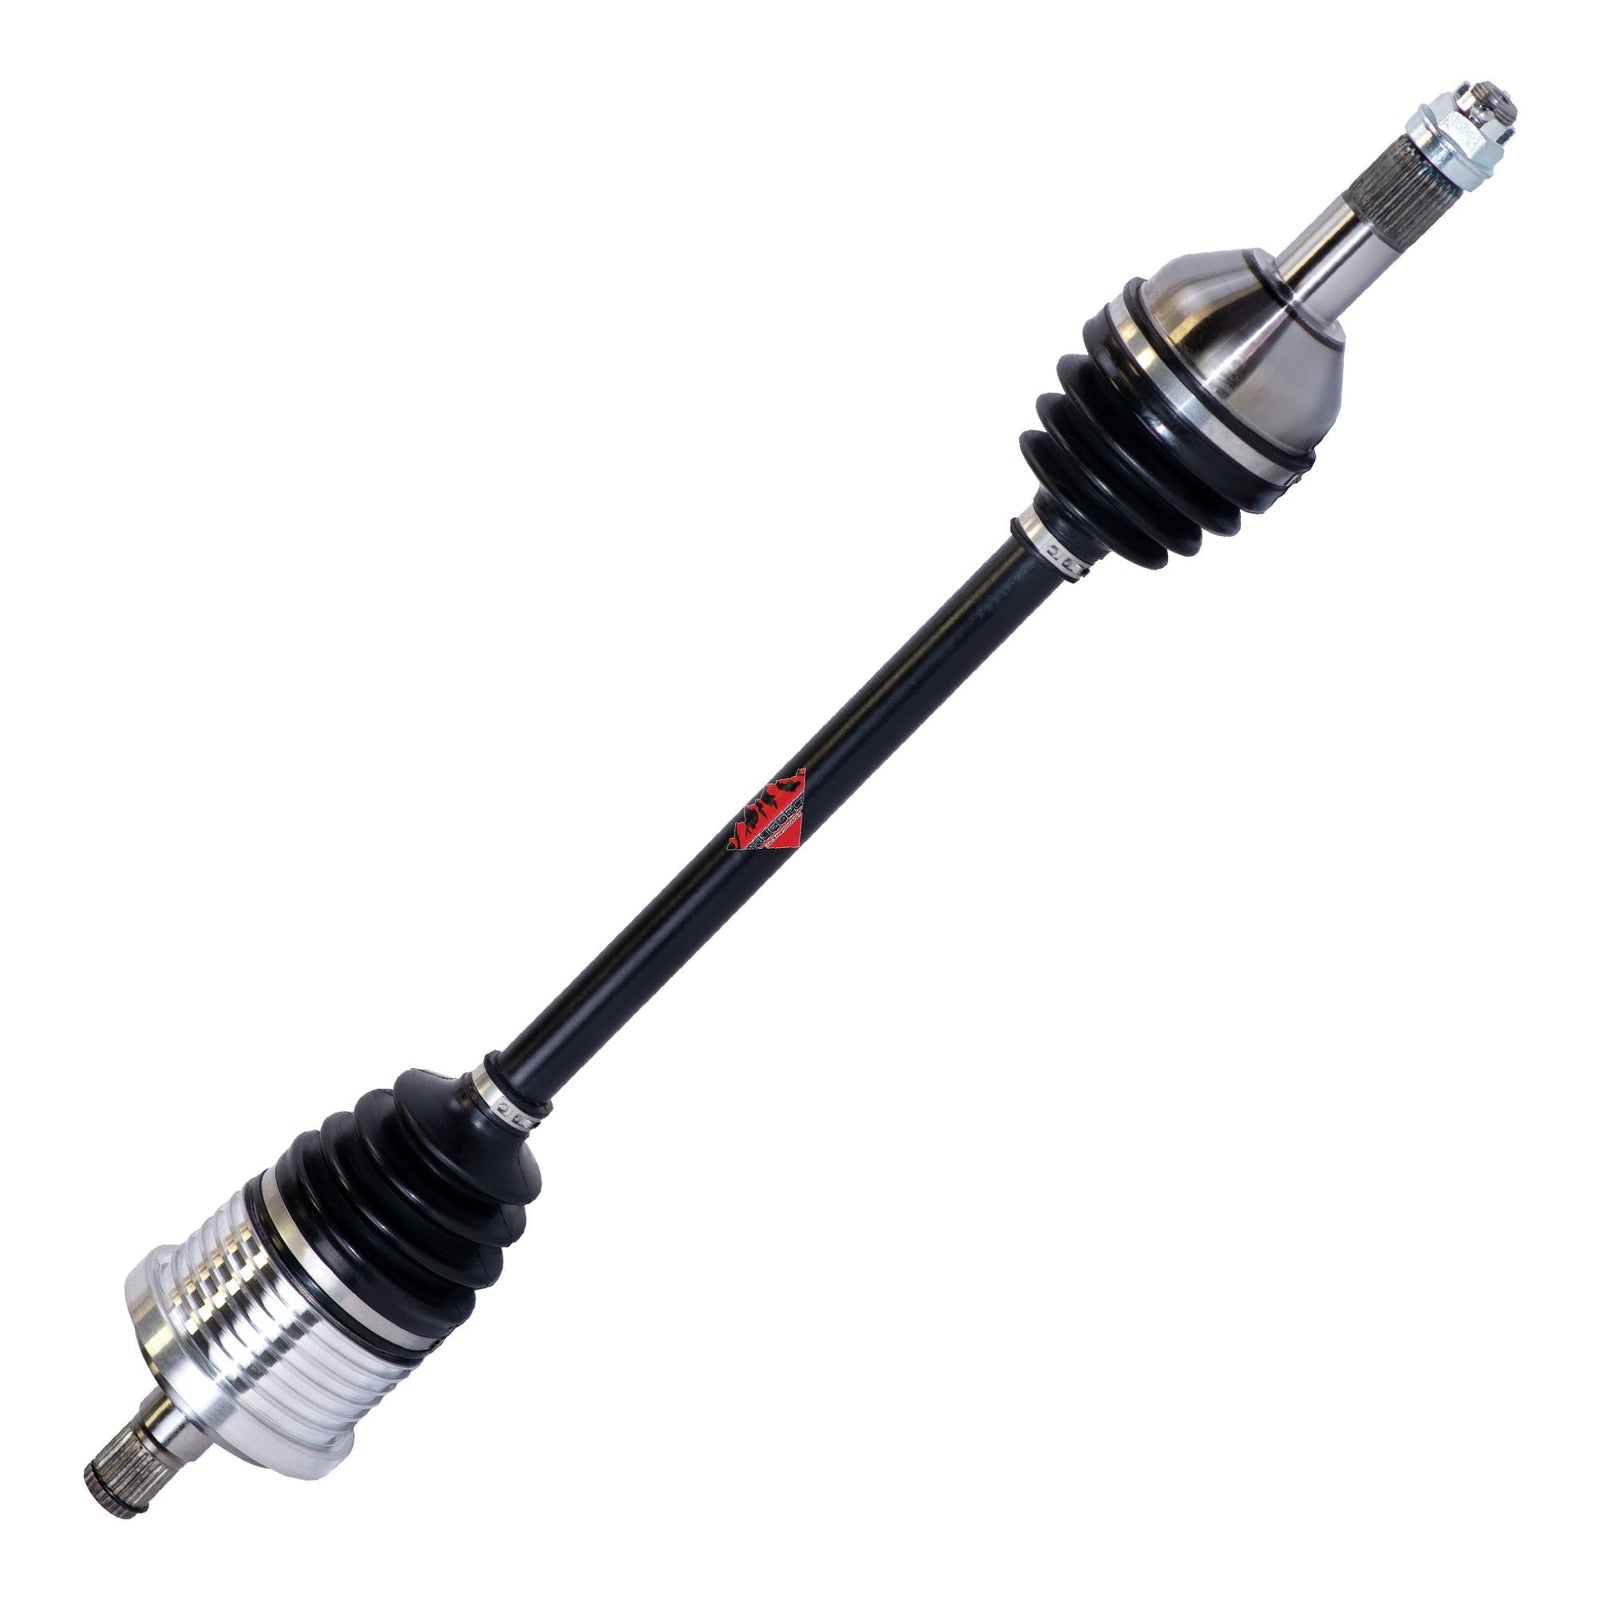 Arctic Cat Prowler 650 Rugged Performance Axle